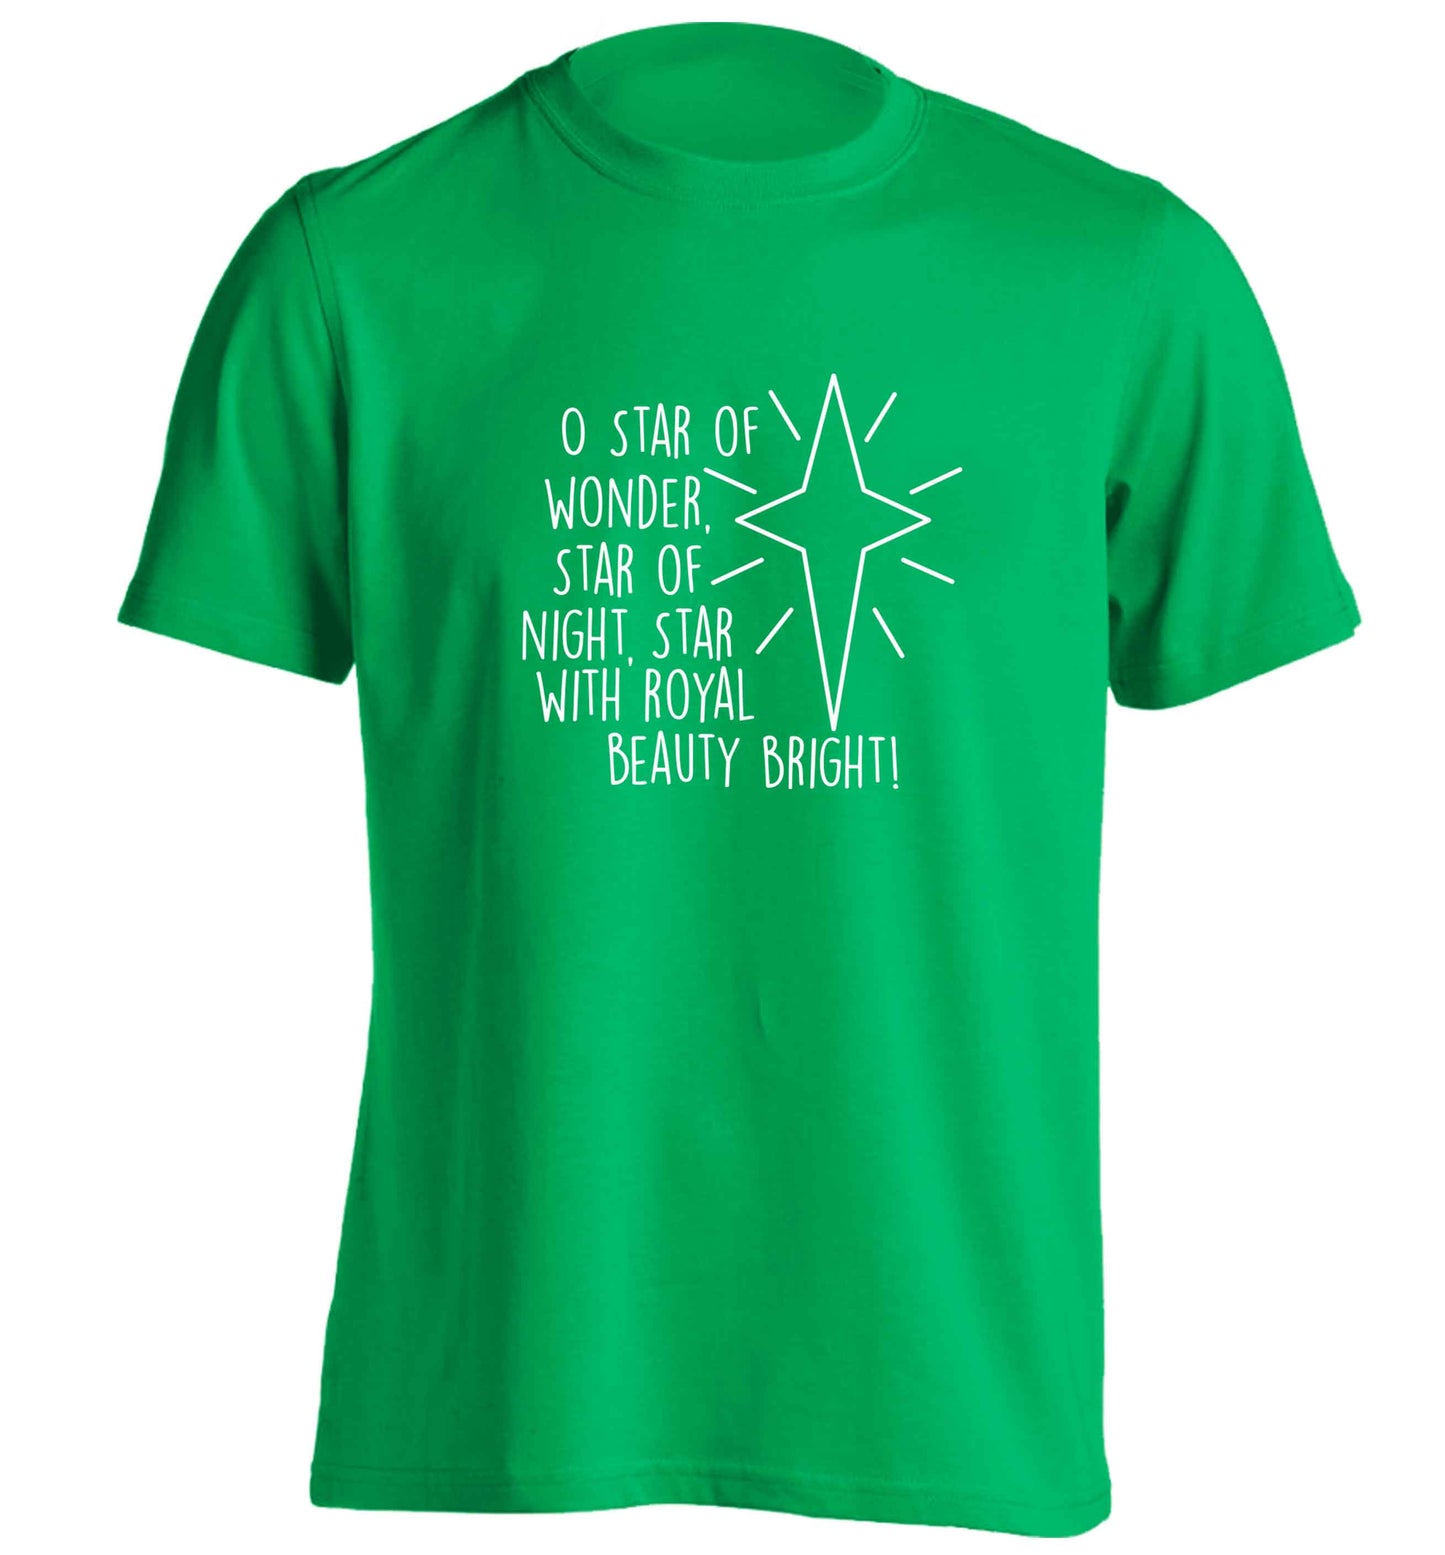 Oh star of wonder star of night, star with royal beauty bright adults unisex green Tshirt 2XL